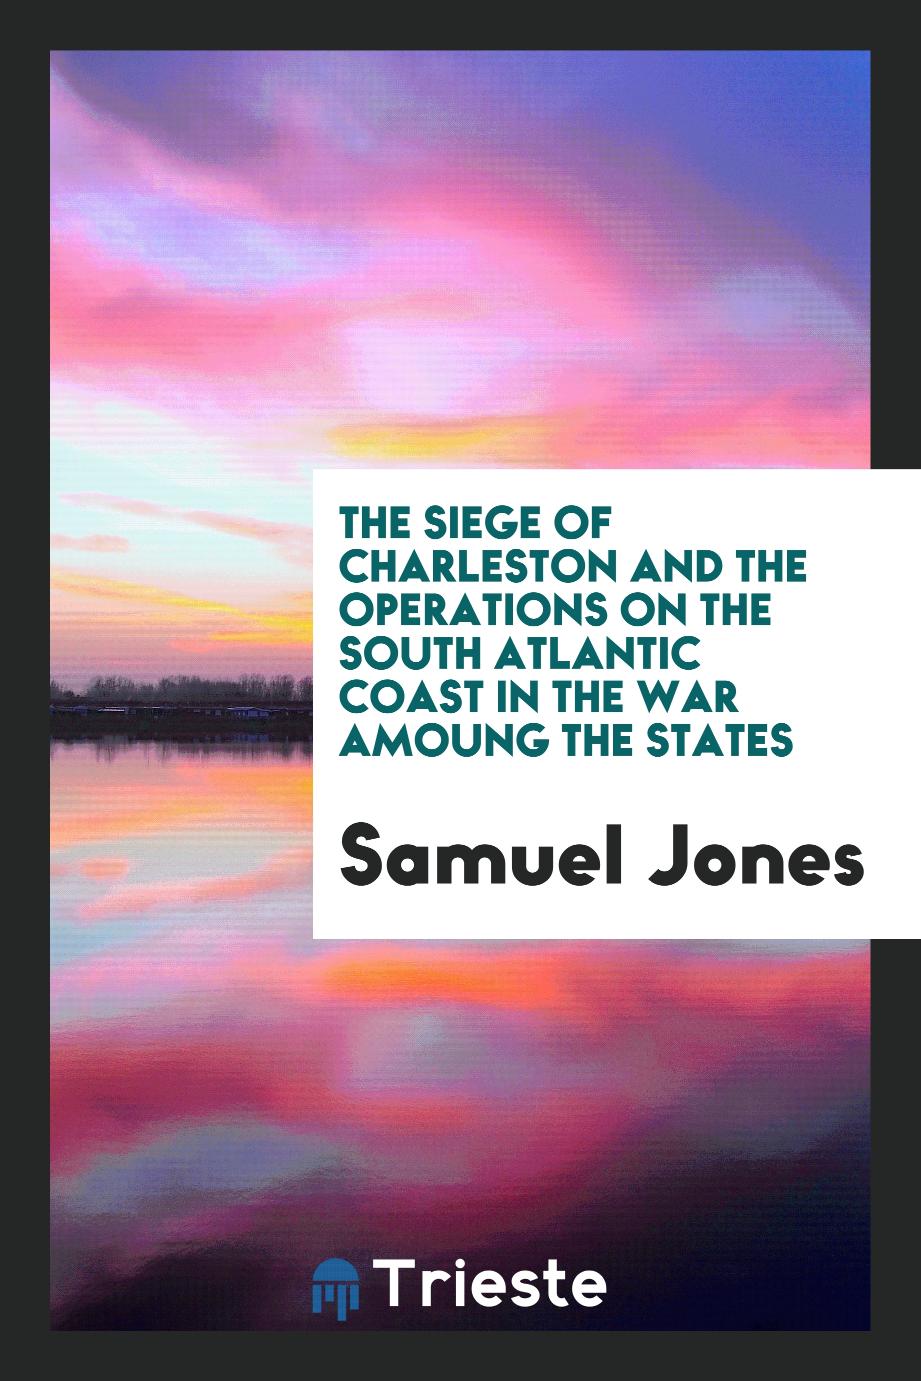 The Siege of Charleston and the Operations on the South Atlantic Coast in the War Amoung the States